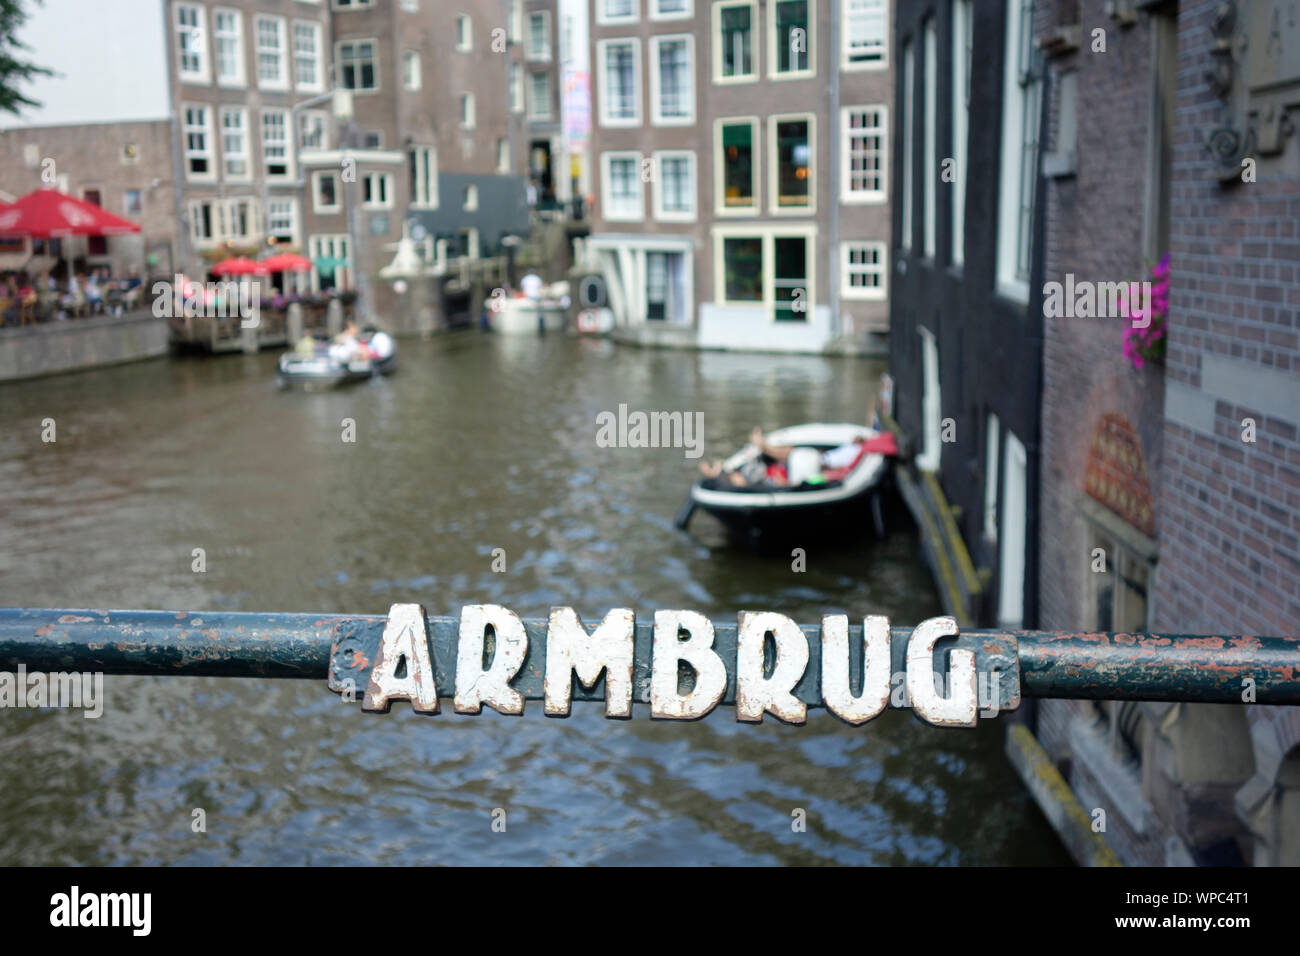 Armbrug à Oudezijds Wal Voorburg, Amsterdam, Pays-Bas Photo Stock - Alamy